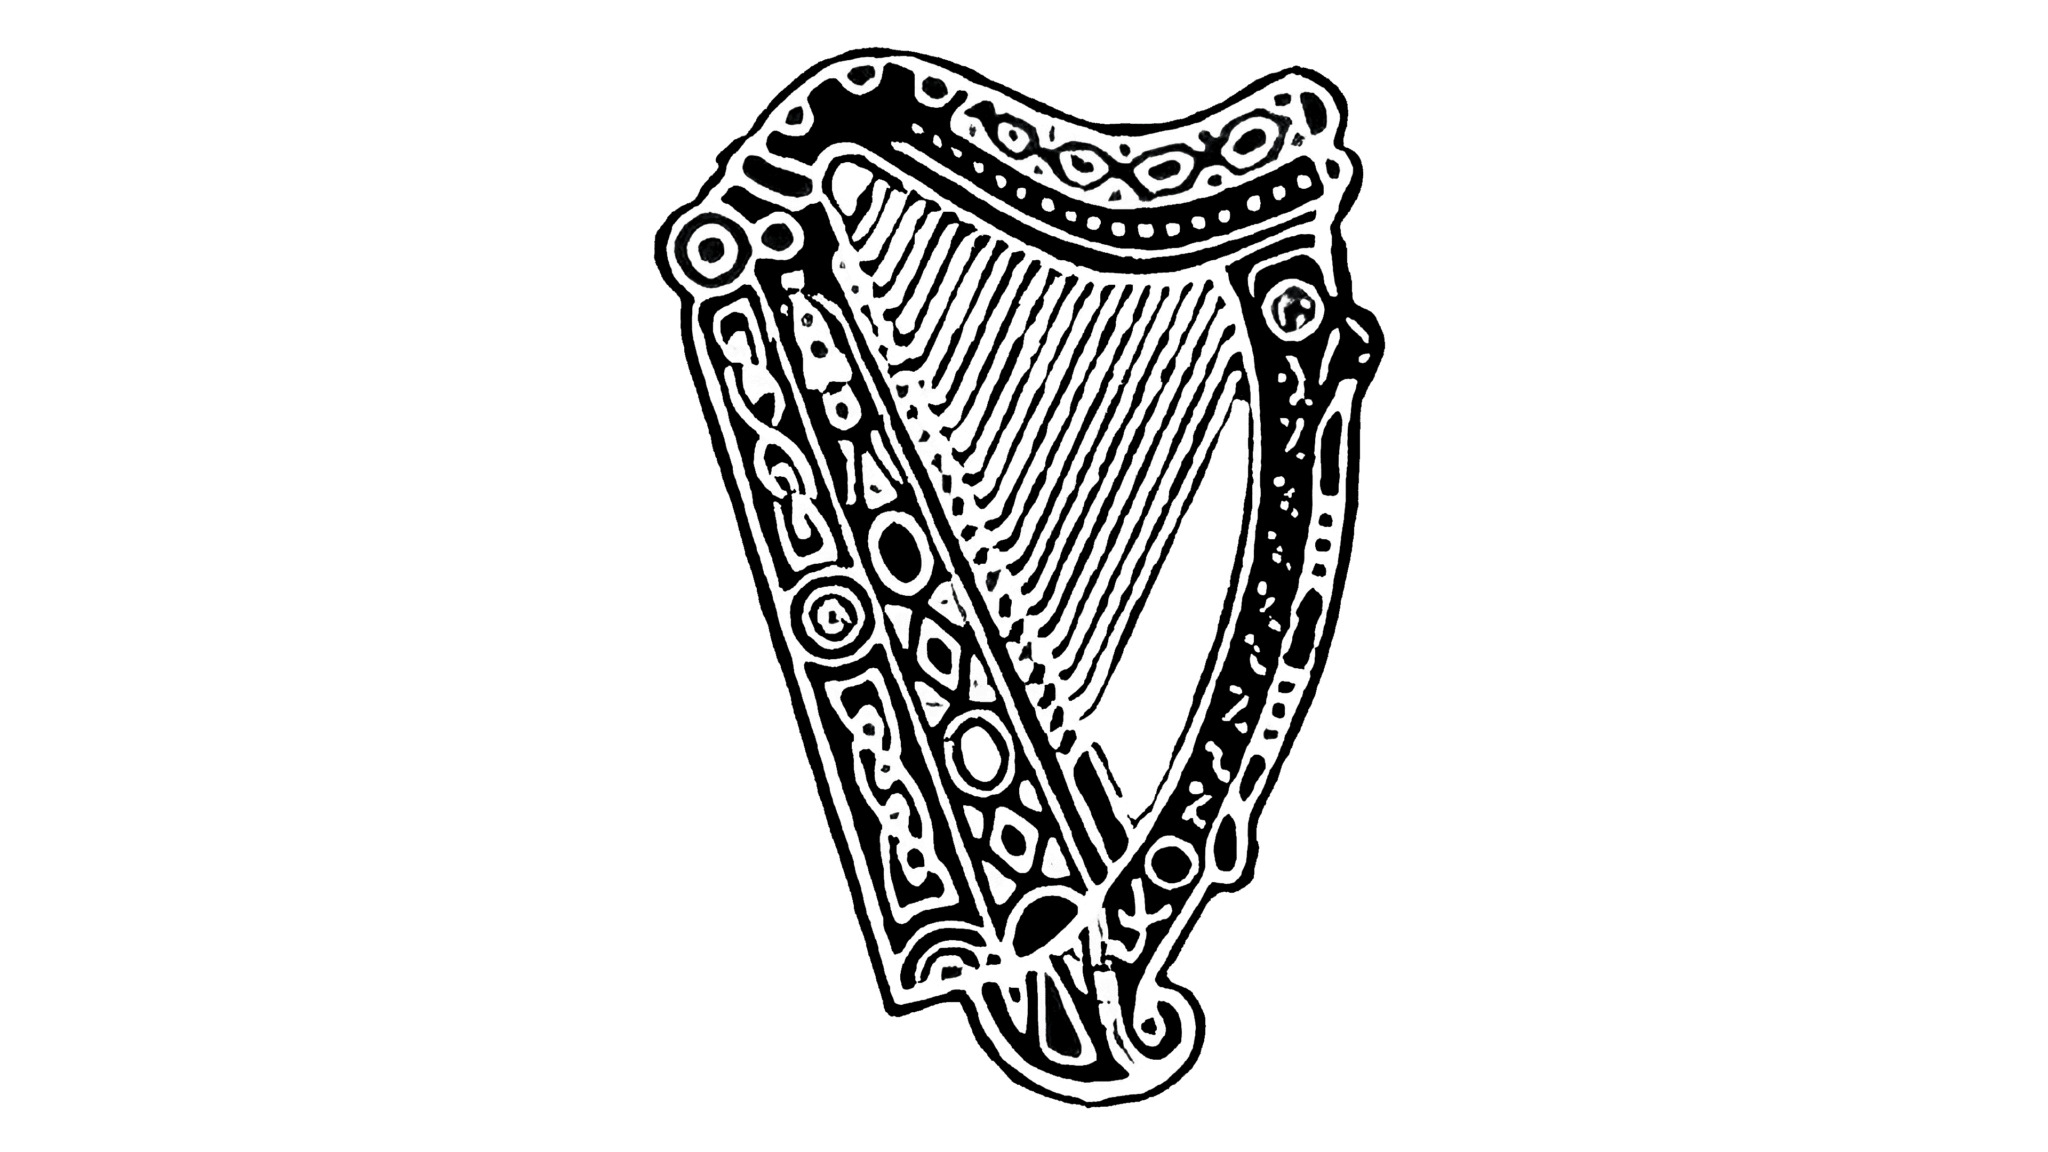 Guinness Logo and sign, new logo meaning and history, PNG, SVG